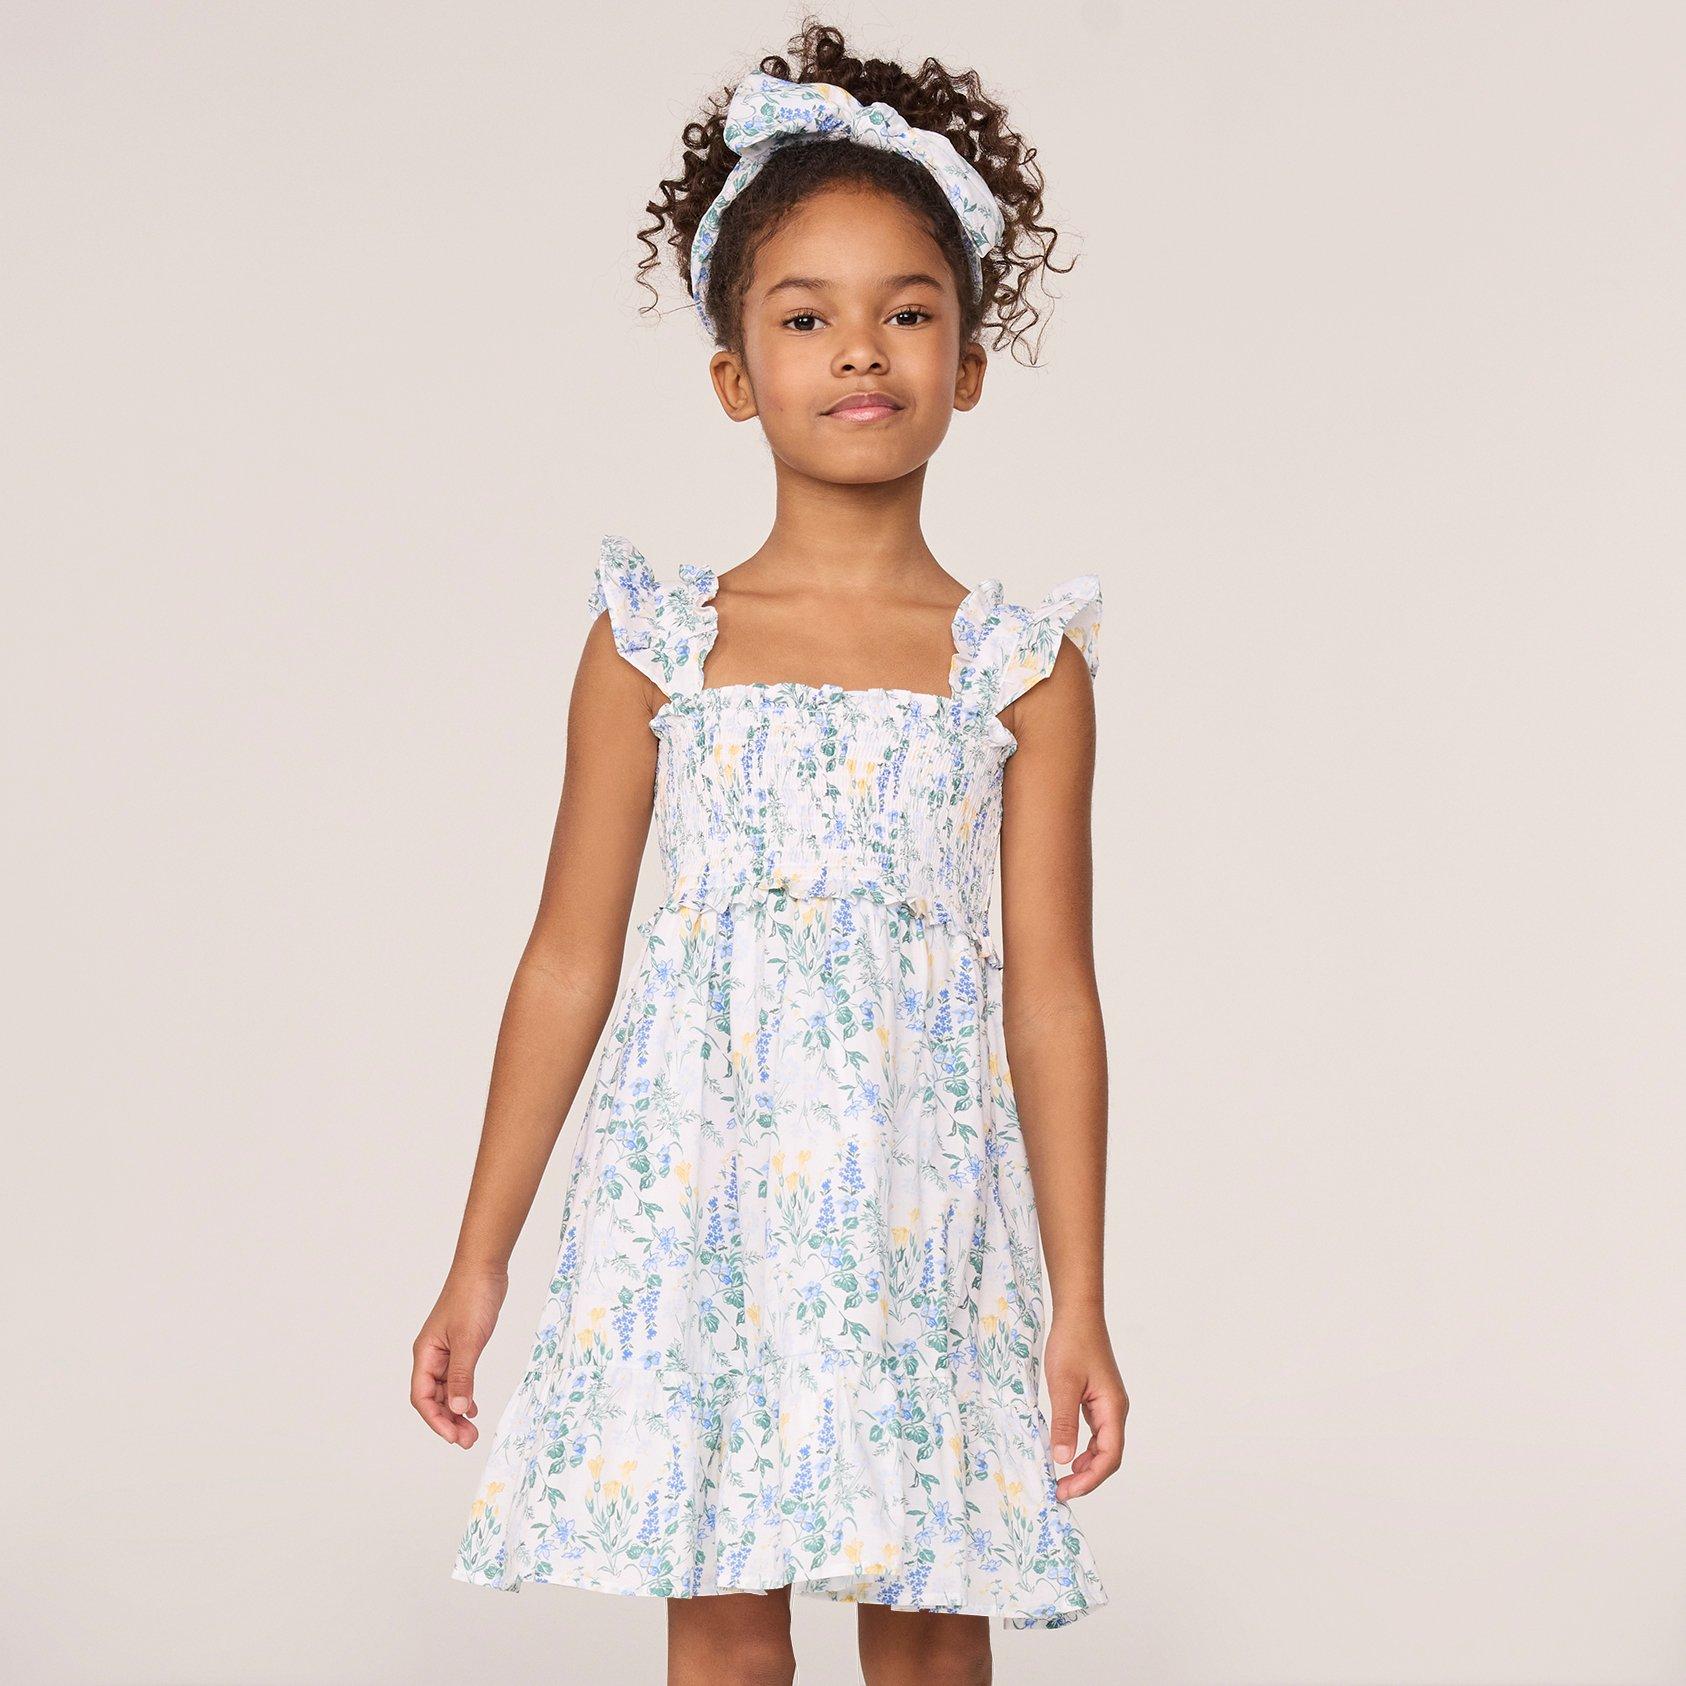 Girl Teal Floral The Emily Floral Smocked Sundress by Janie and Jack